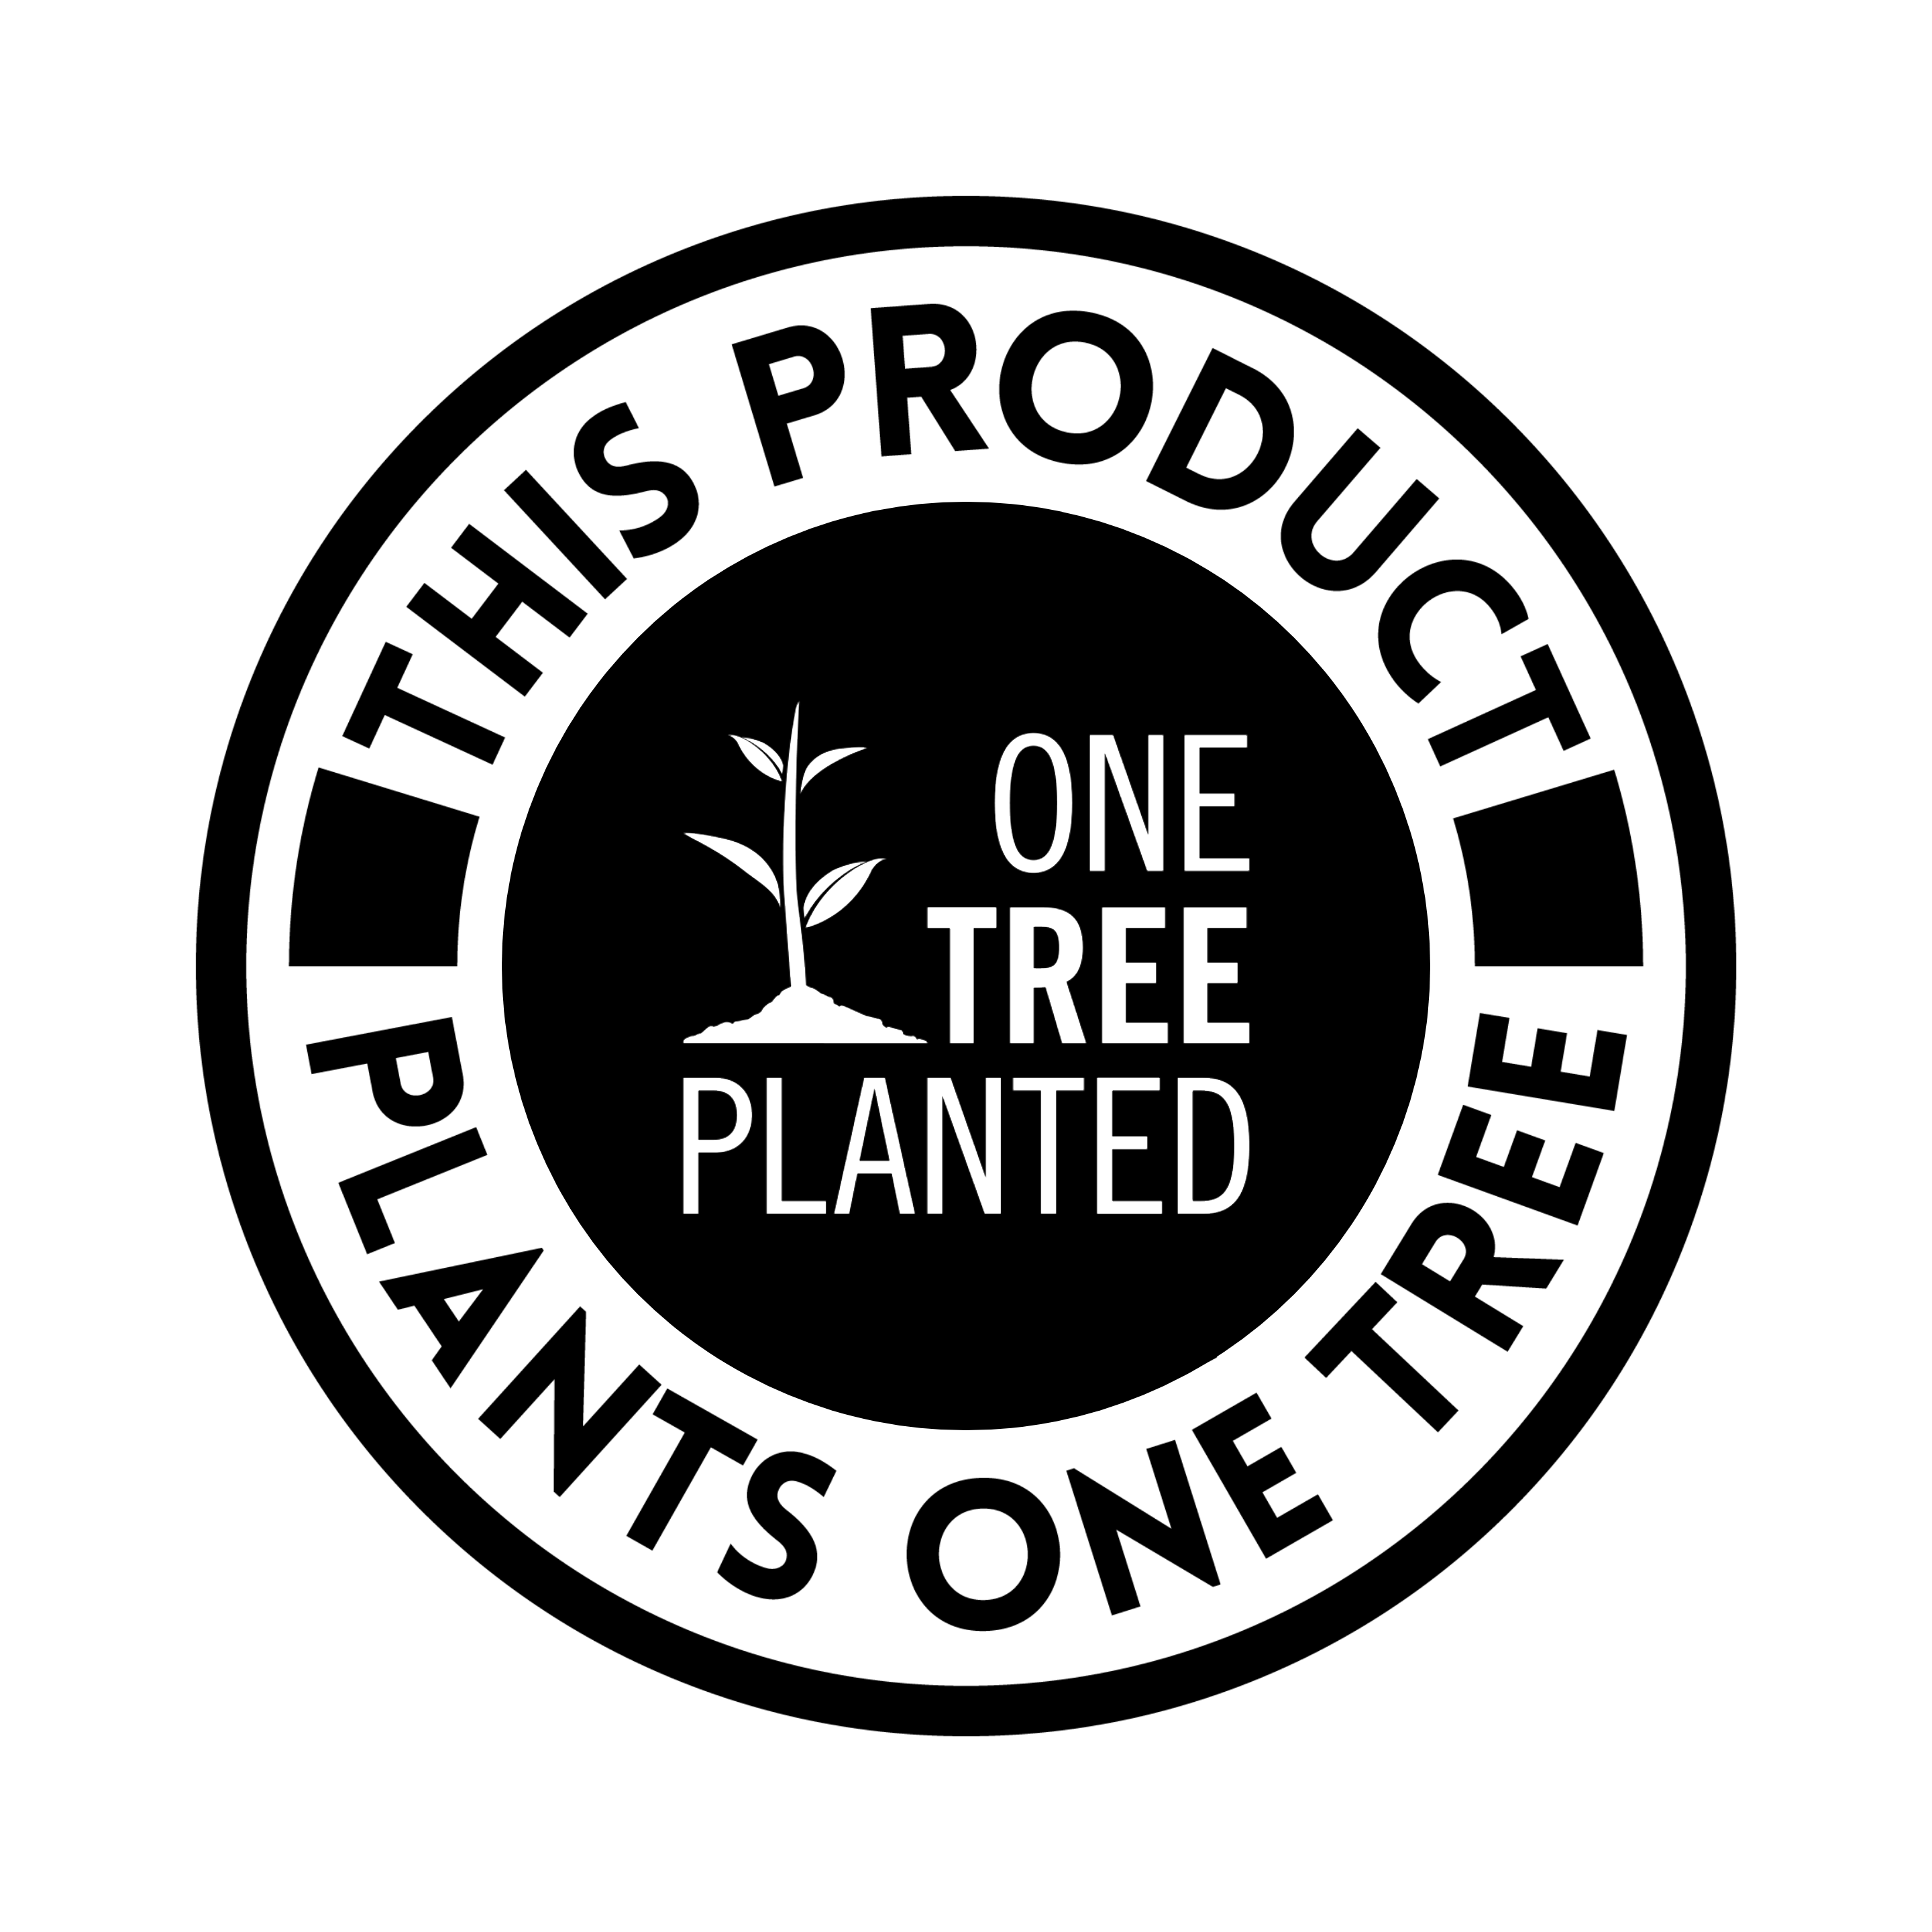 Conor - one Tree planted